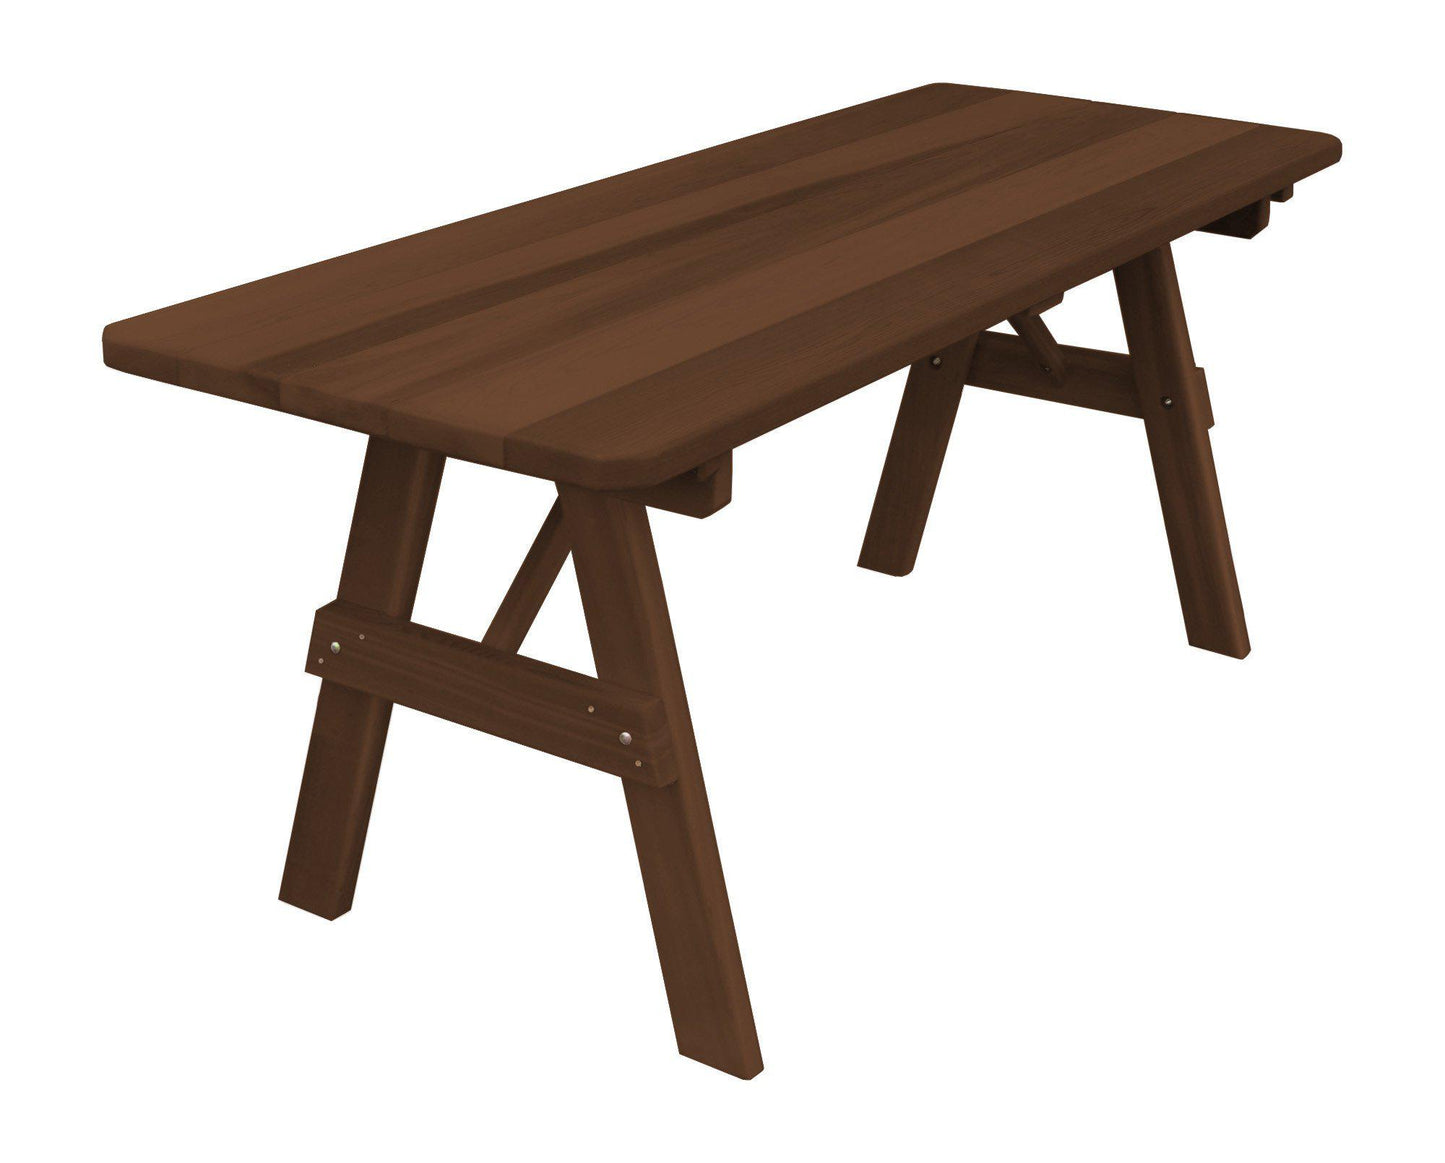 Regallion Outdoor Western Red Cedar 44" Traditional Table Only - LEAD TIME TO SHIP 2 WEEKS